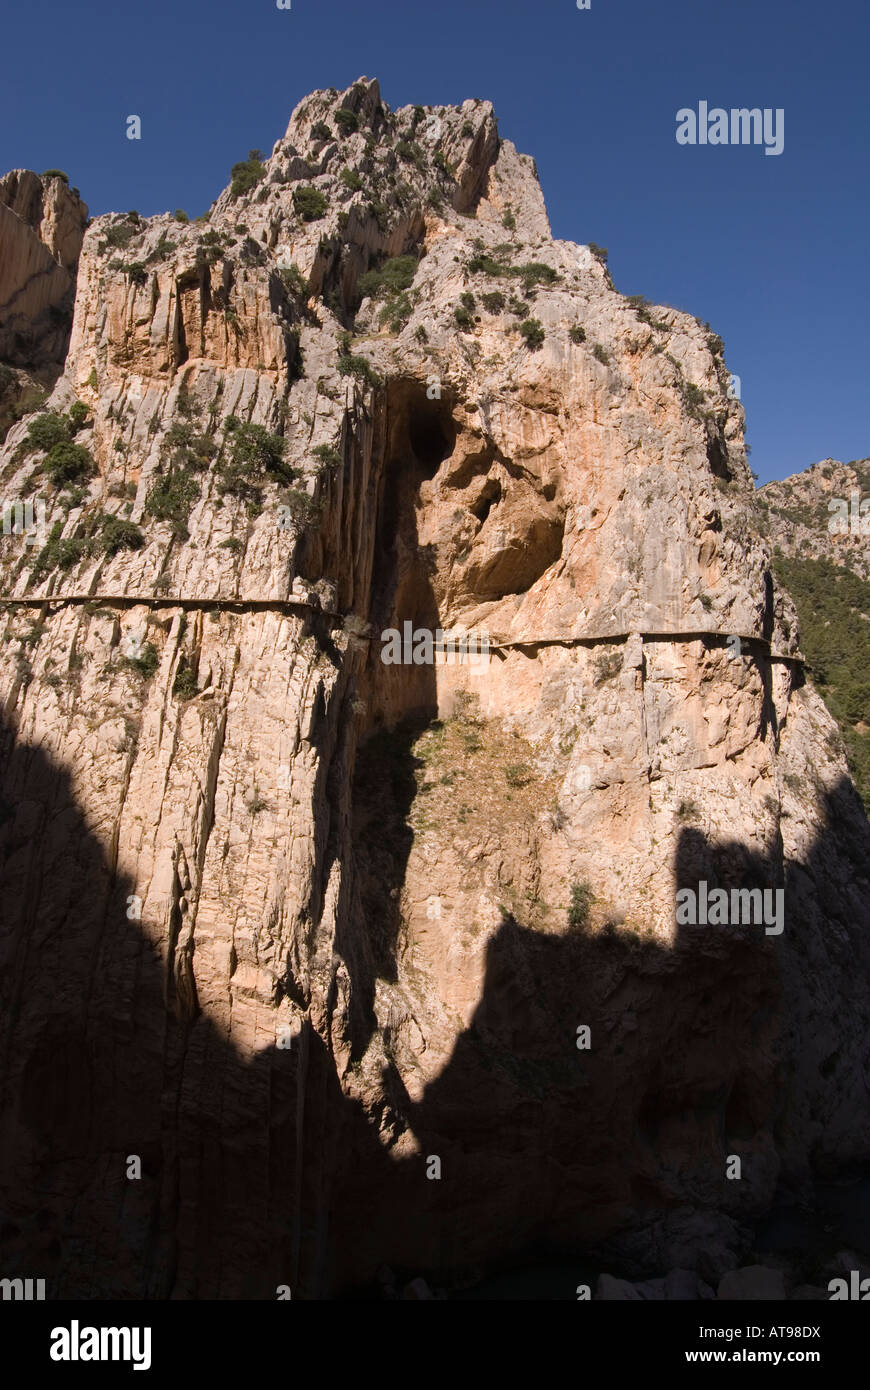 View of the Camino del Rey, El Chorro gorge, Andalusia, Spain Stock Photo